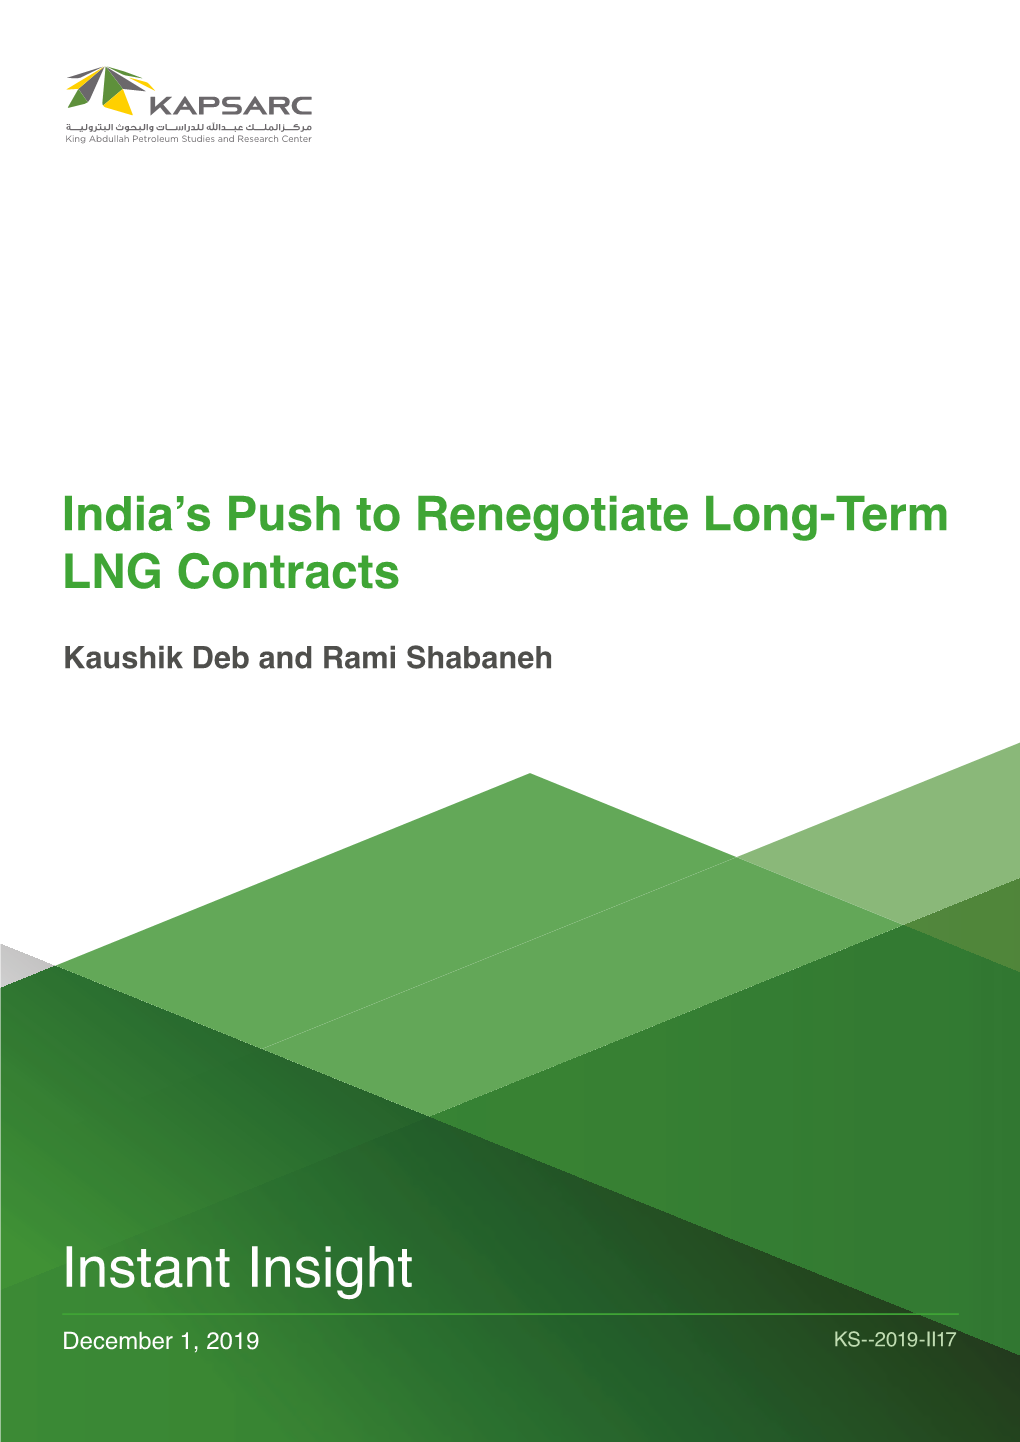 India's Push to Renegotiate Long-Term LNG Contracts